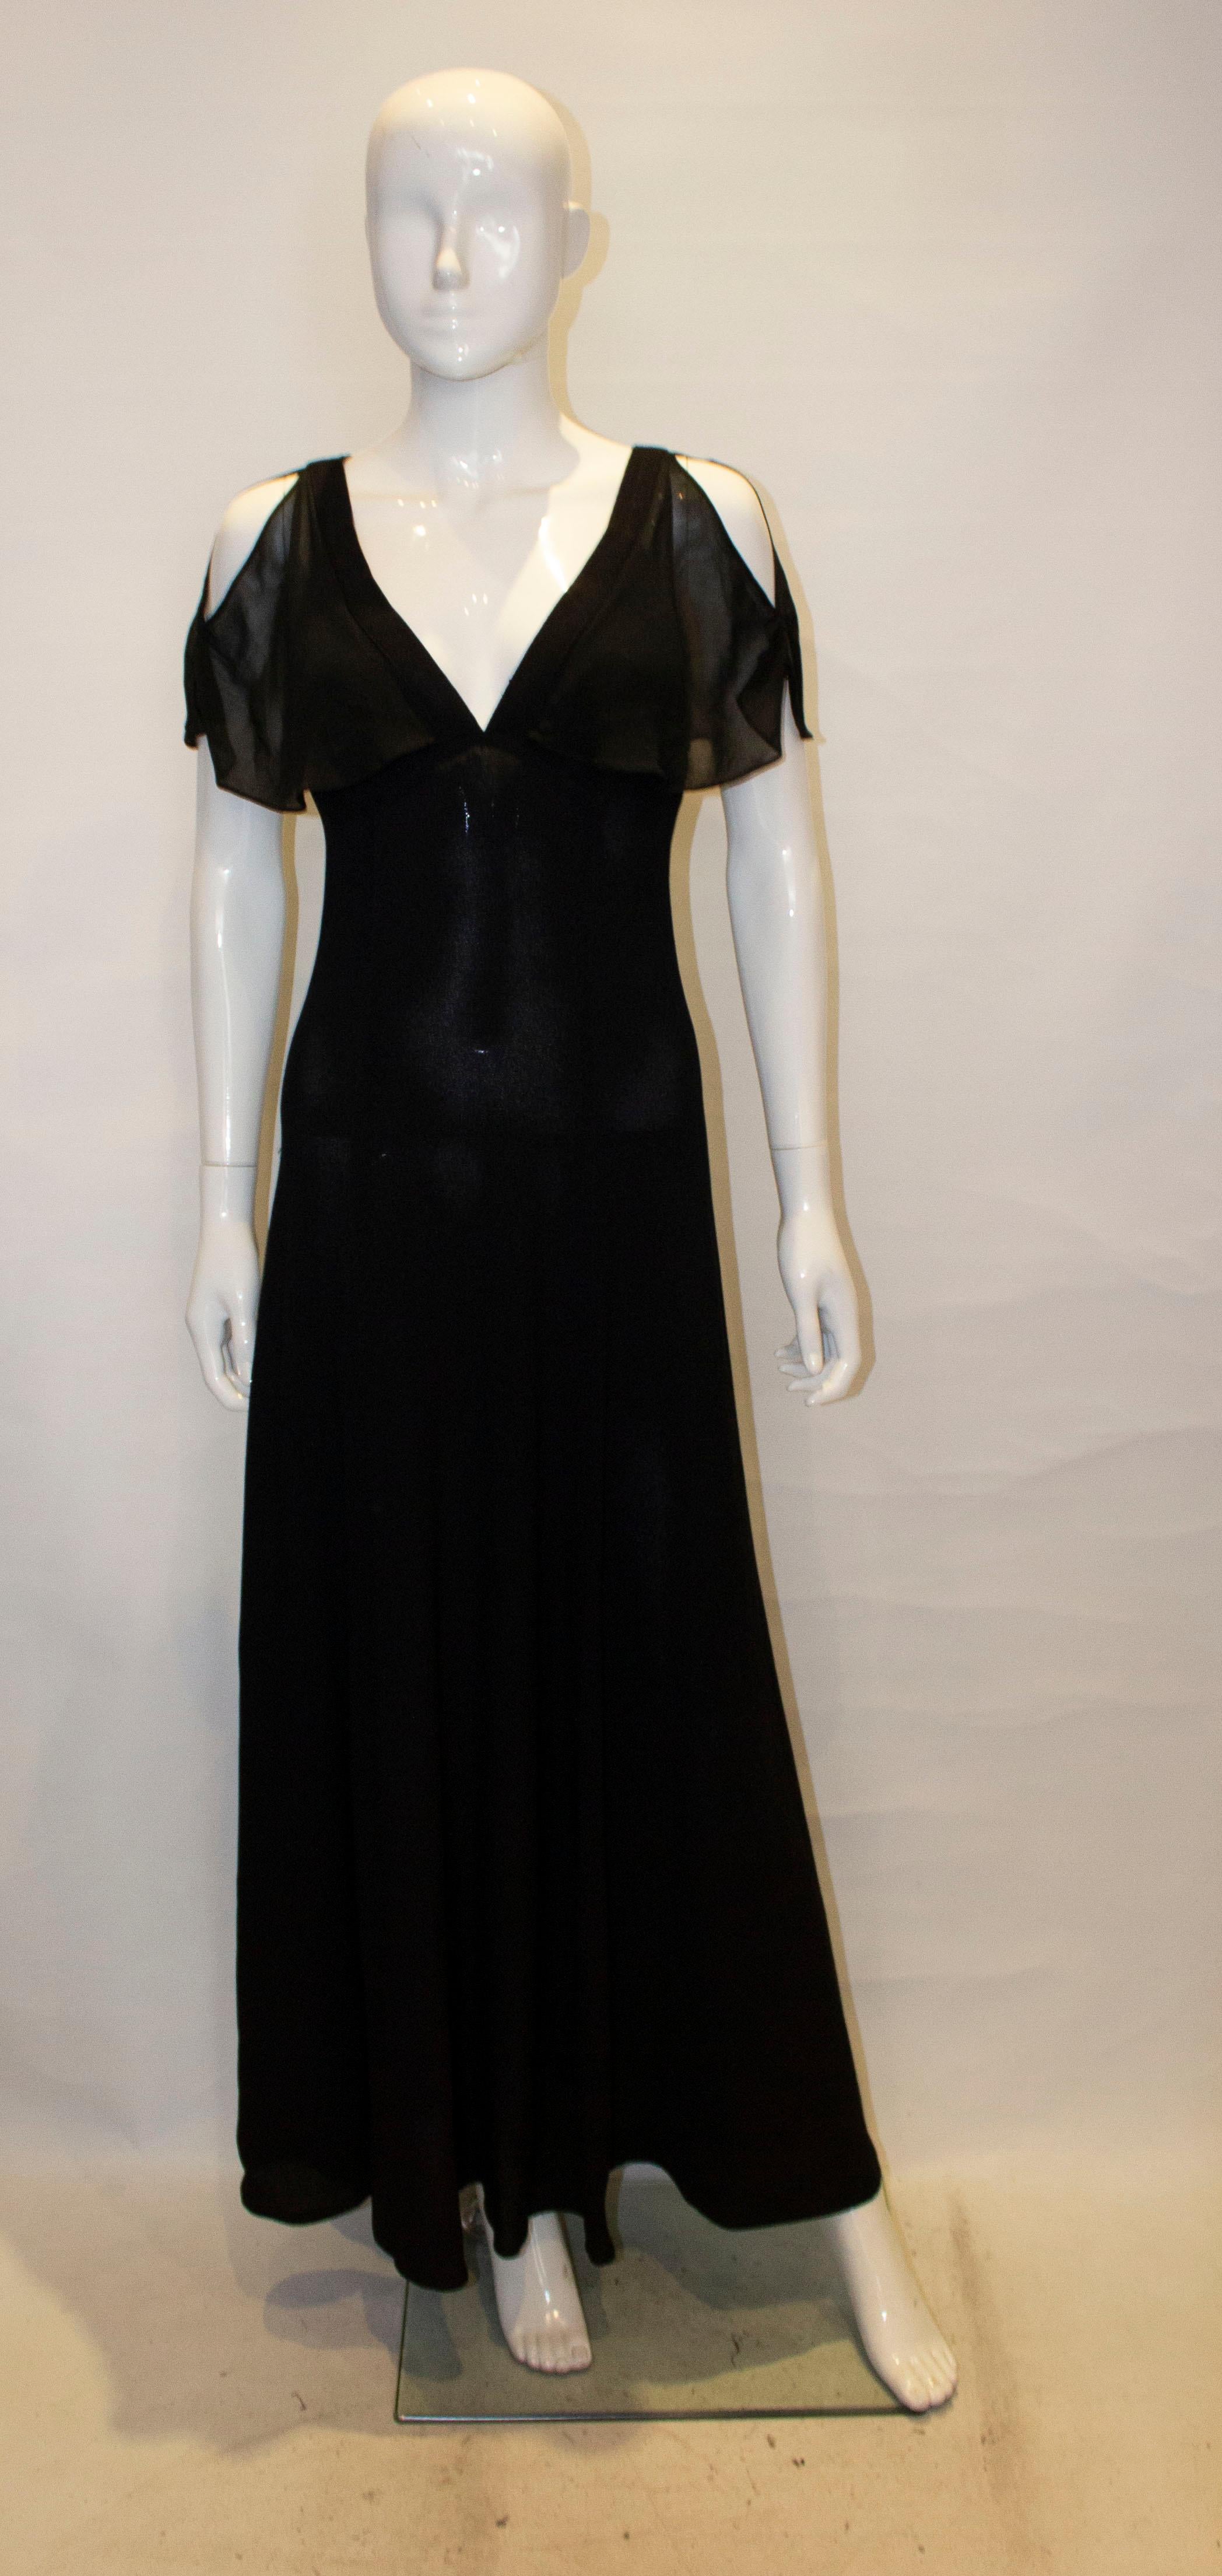 A pretty vintage evening dress by Radley in their signature moss crepe.  The dress has a v neckline  and backline with central back zip and shear cap sleeves.